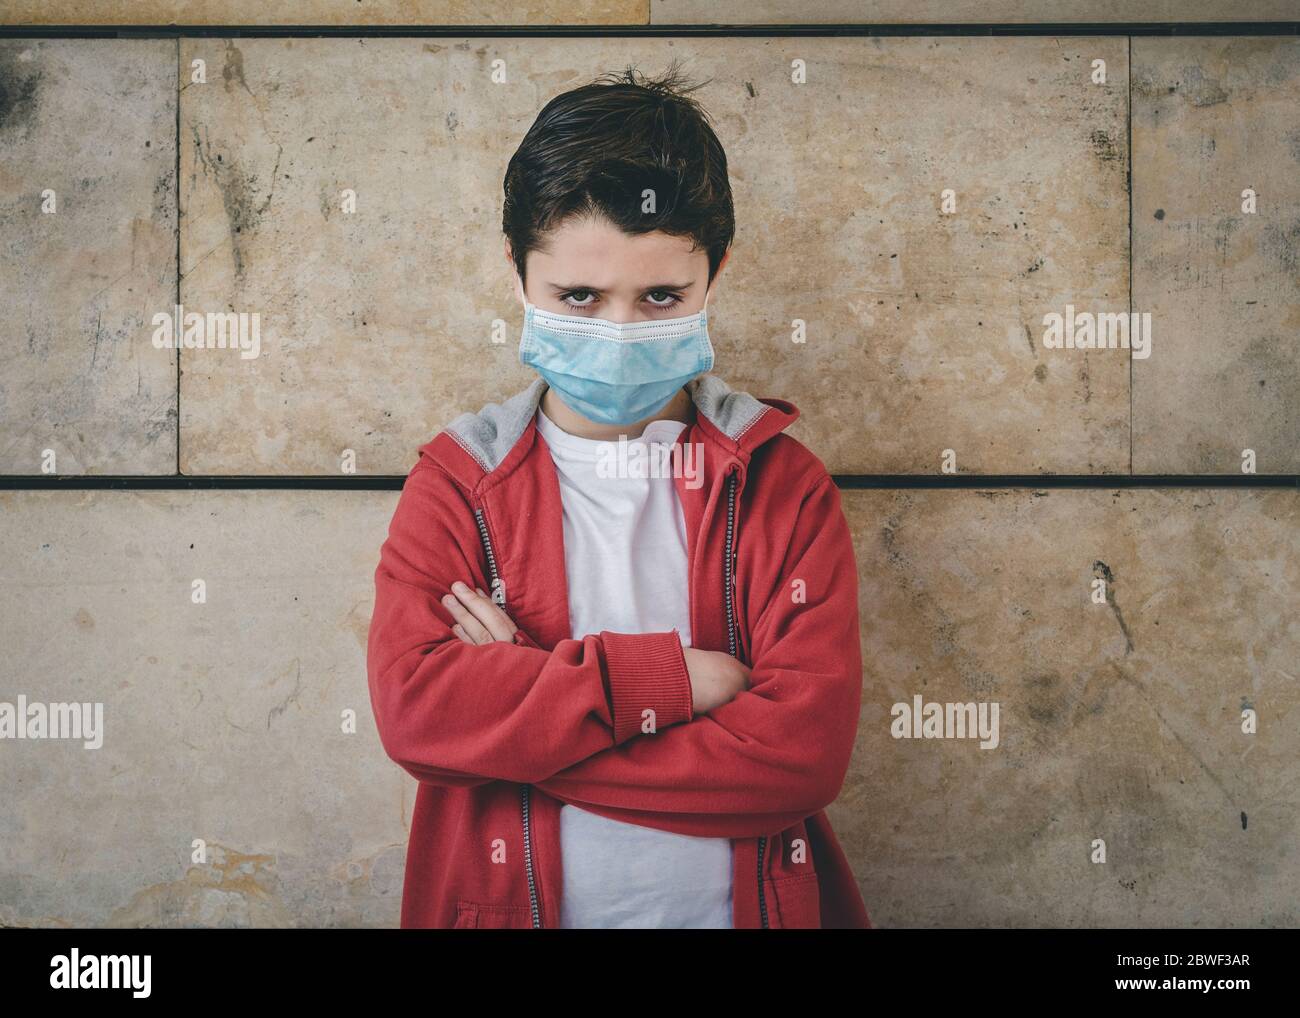 angry kid wearing medical mask outdoor Stock Photo